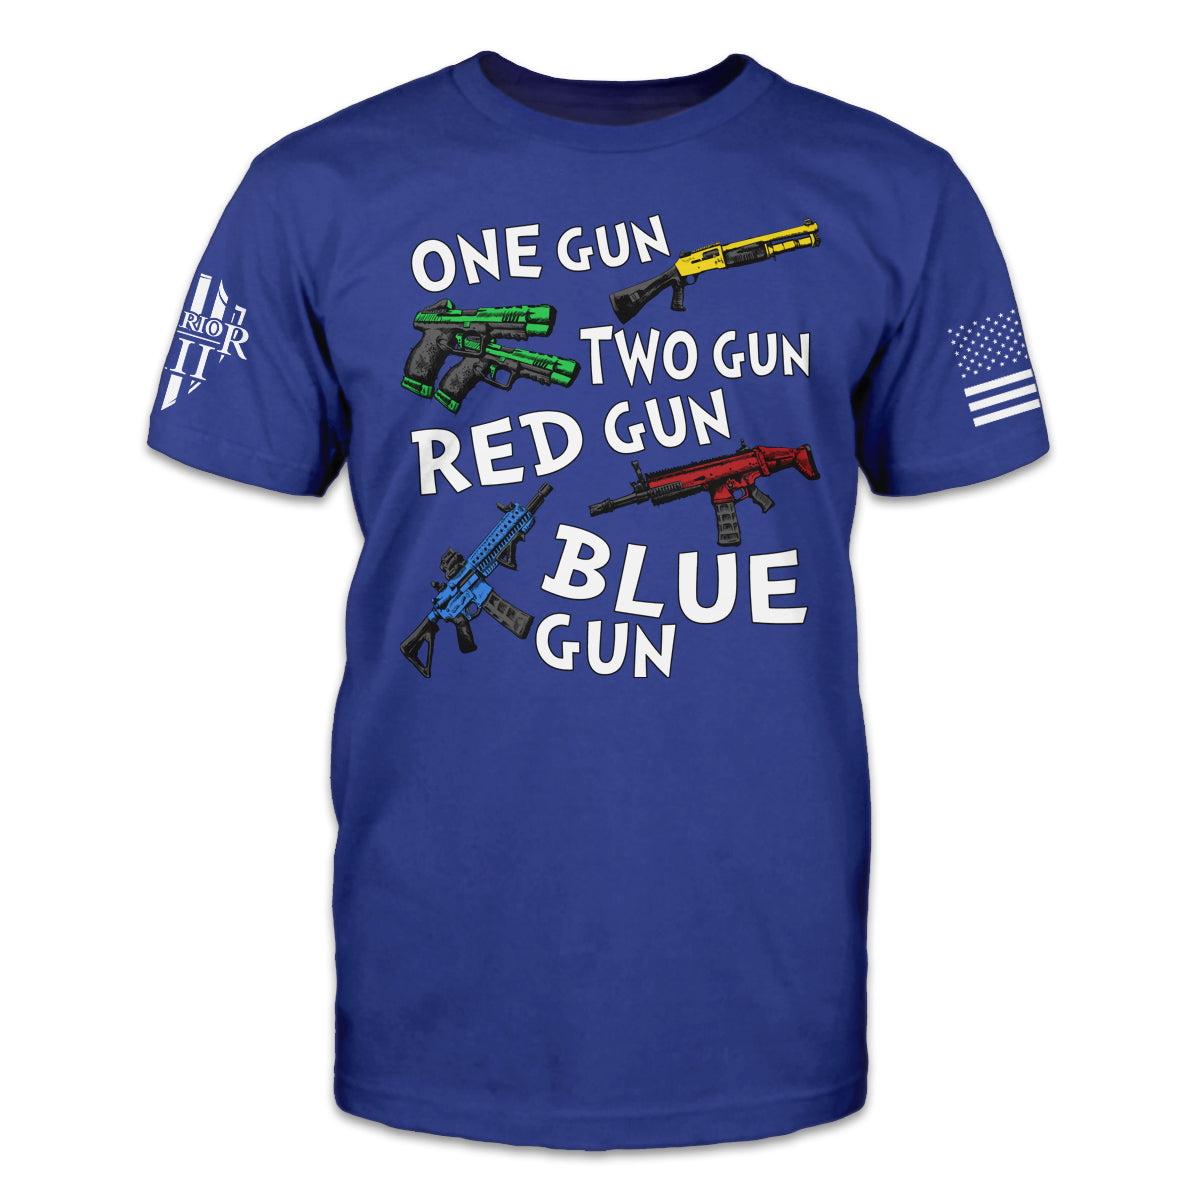 A blue t-shirt with the words "One gun, two gun, red gun blue gun" with colored guns printed on the front.